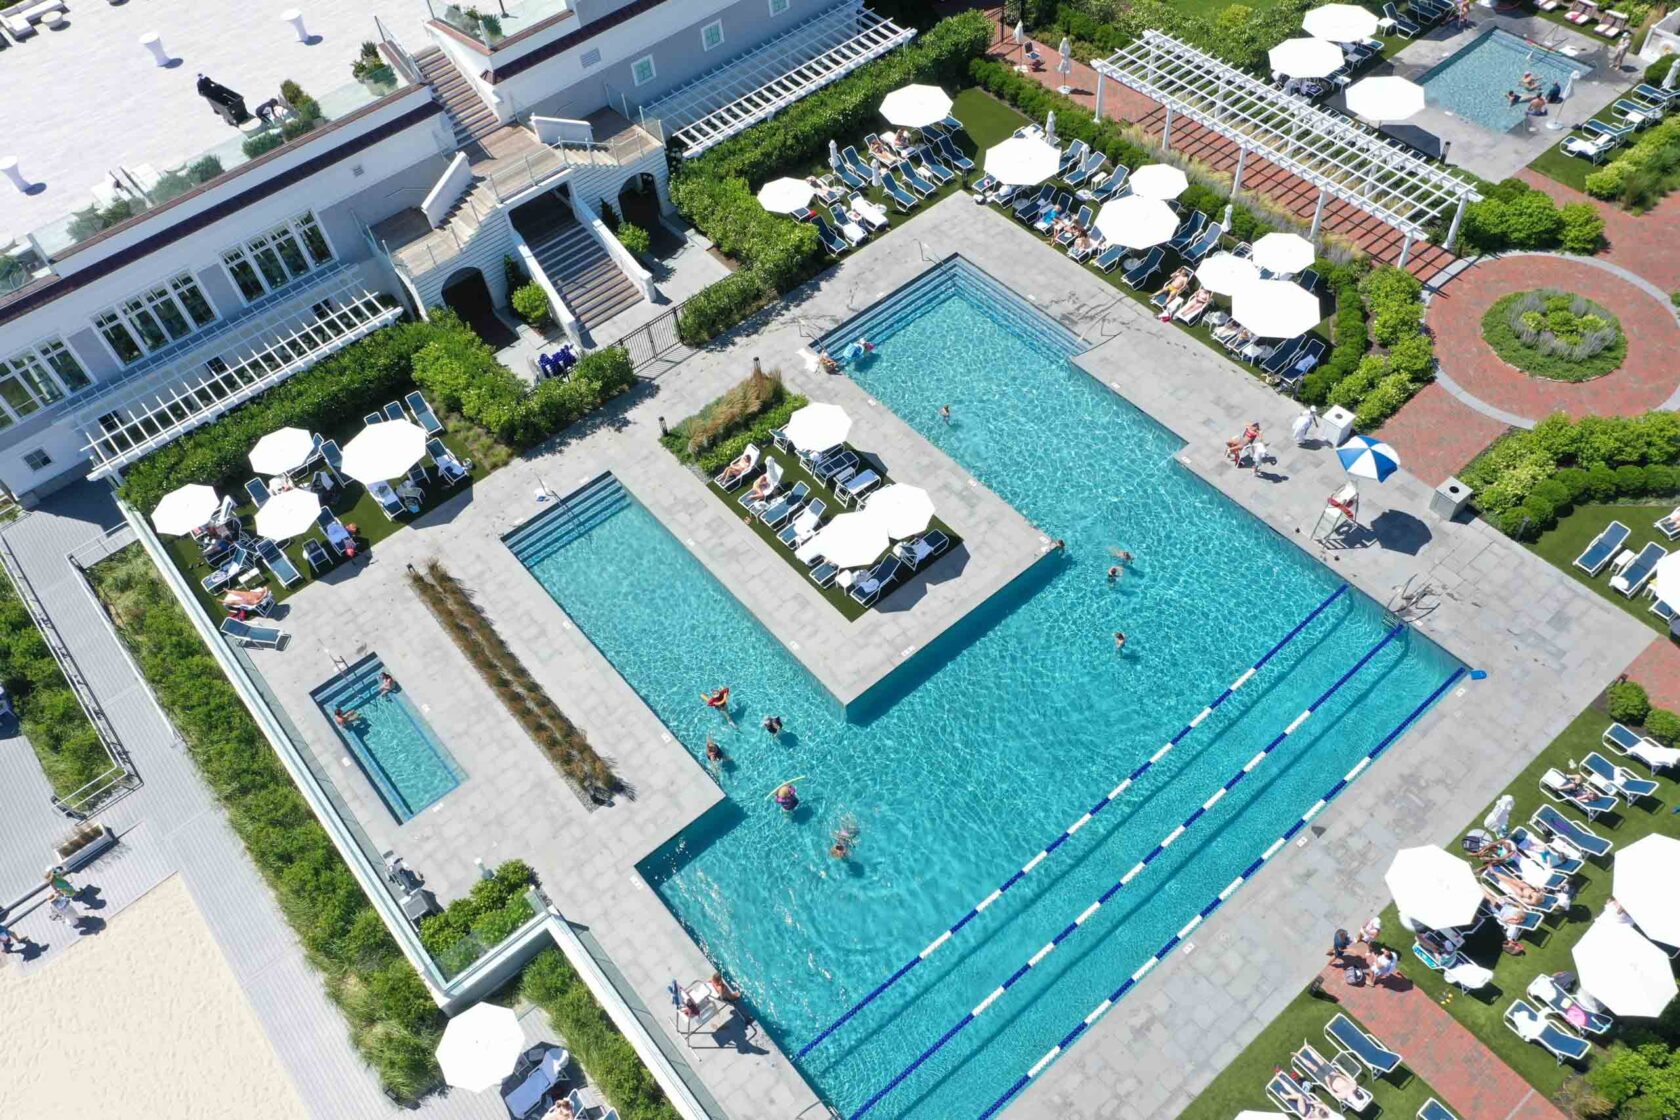 Aerial view of a pool.